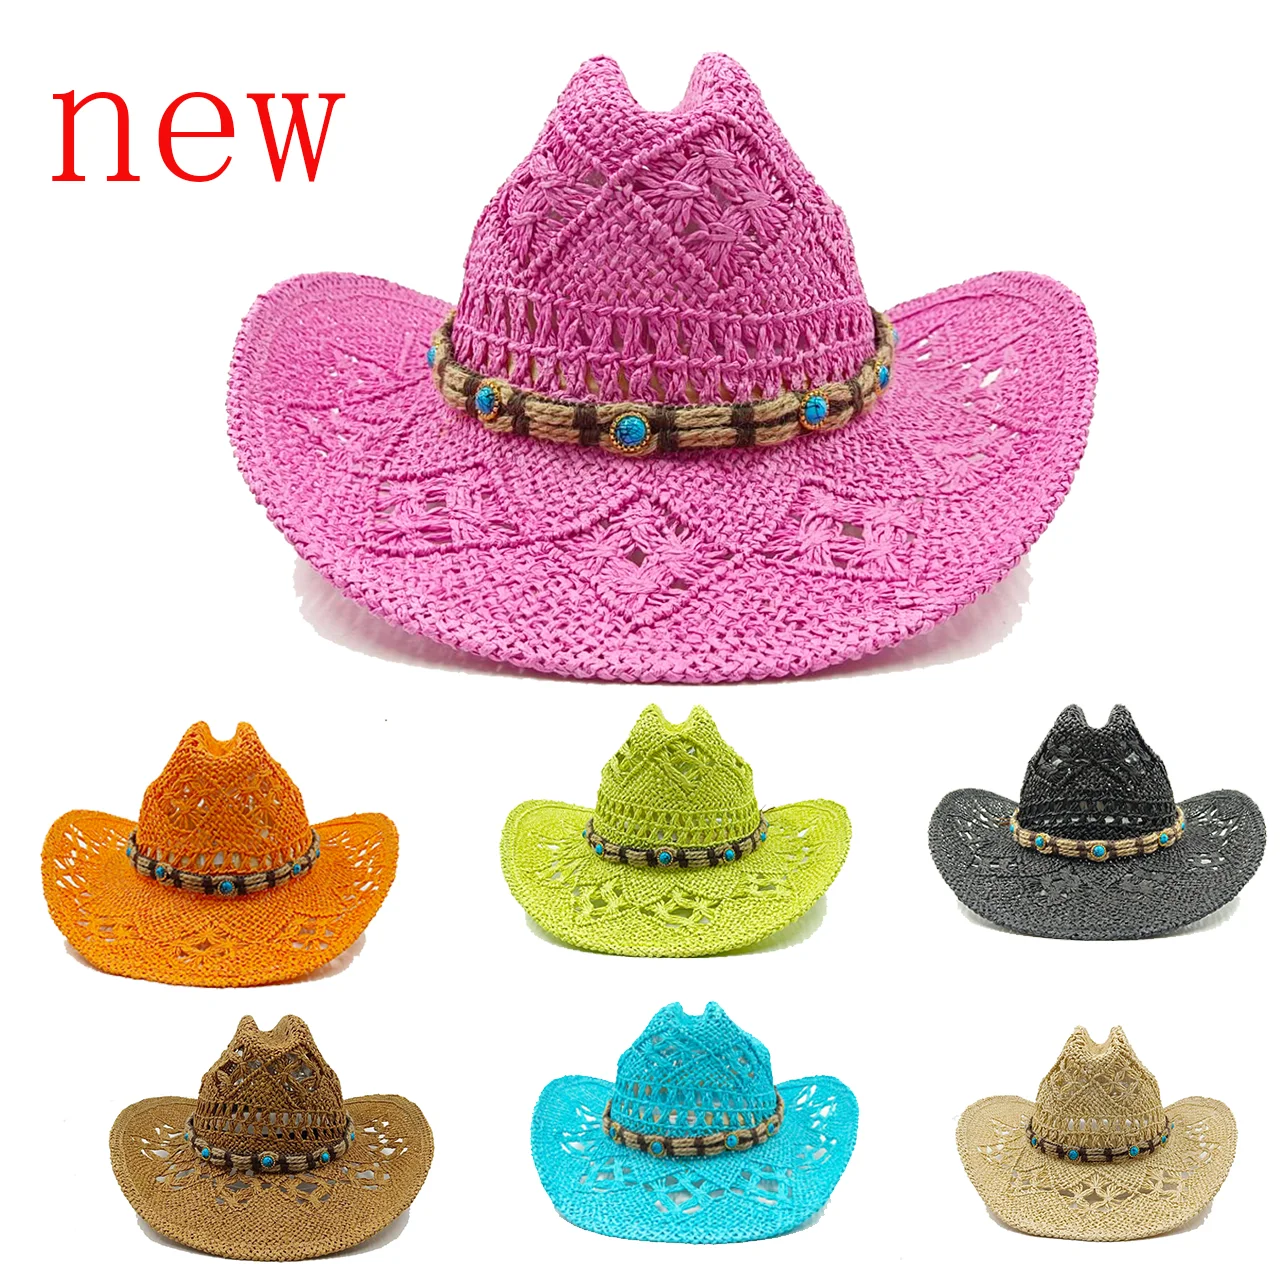 

New Colorful Summer Double Concave Denim Straw Hat Hollow Woven Men's and Women's Outdoor Sunshade Cowboy hat gorras sombreros